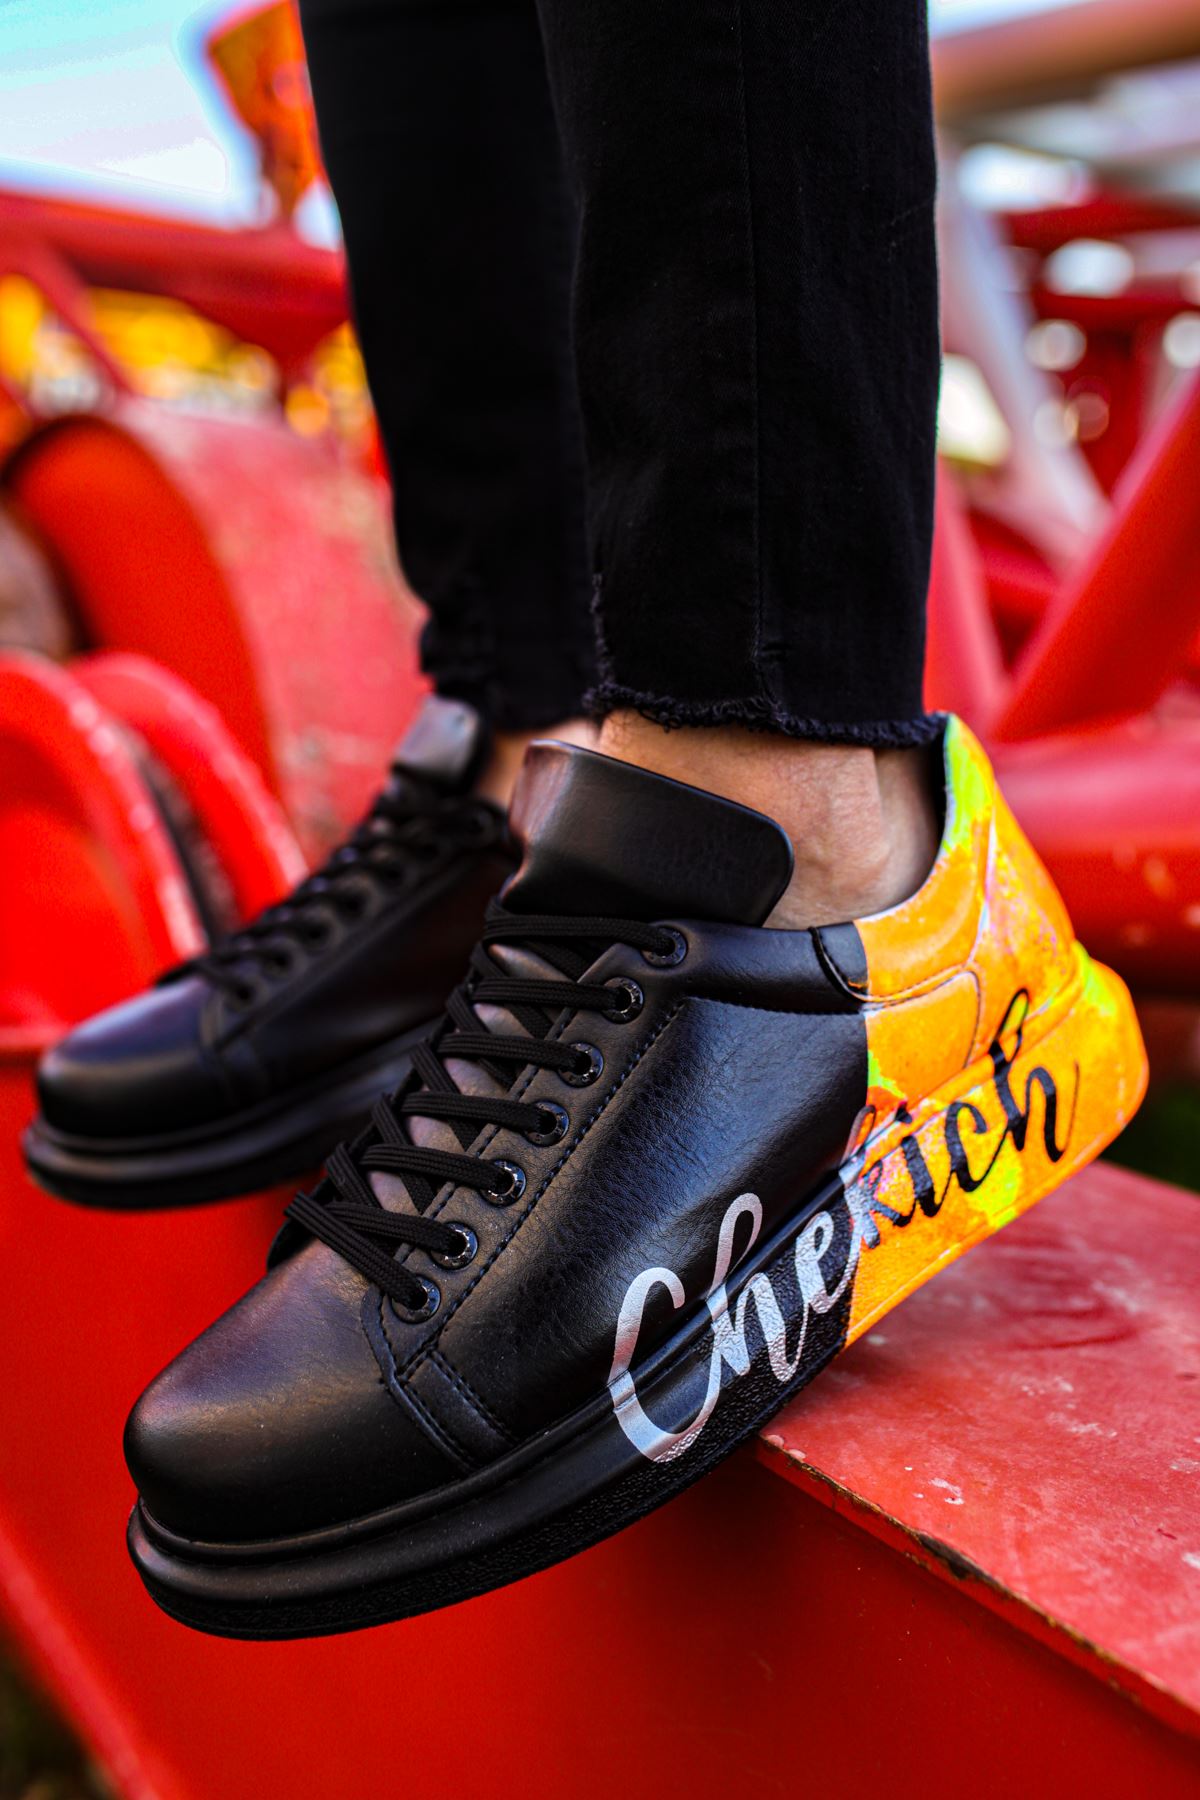 Chekich Men's and Women's Sneakers Black Yellow Aloha Mixed Color Written Lace-up Splash Pattern Unisex Shoes Odorless Casual Air Comfortable Lovers Different Options Hiking Spring Summer Autumn Seasons CH254 - 476